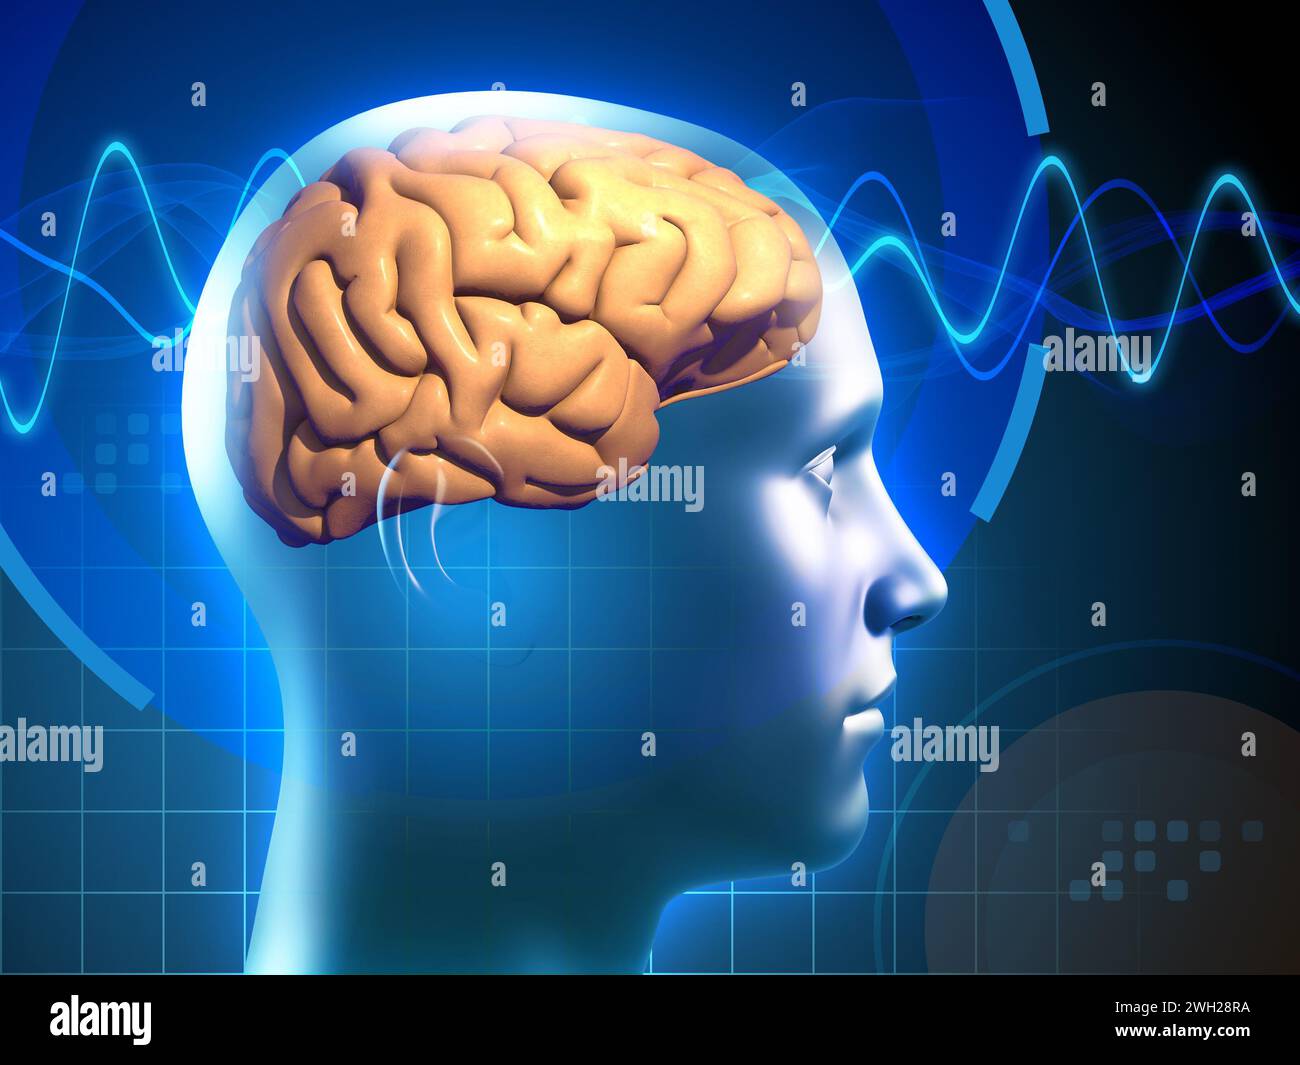 An image of a human brain, crossed by electrical signals, representing thought processes in action. Digital illustration, 3D render. Stock Photo